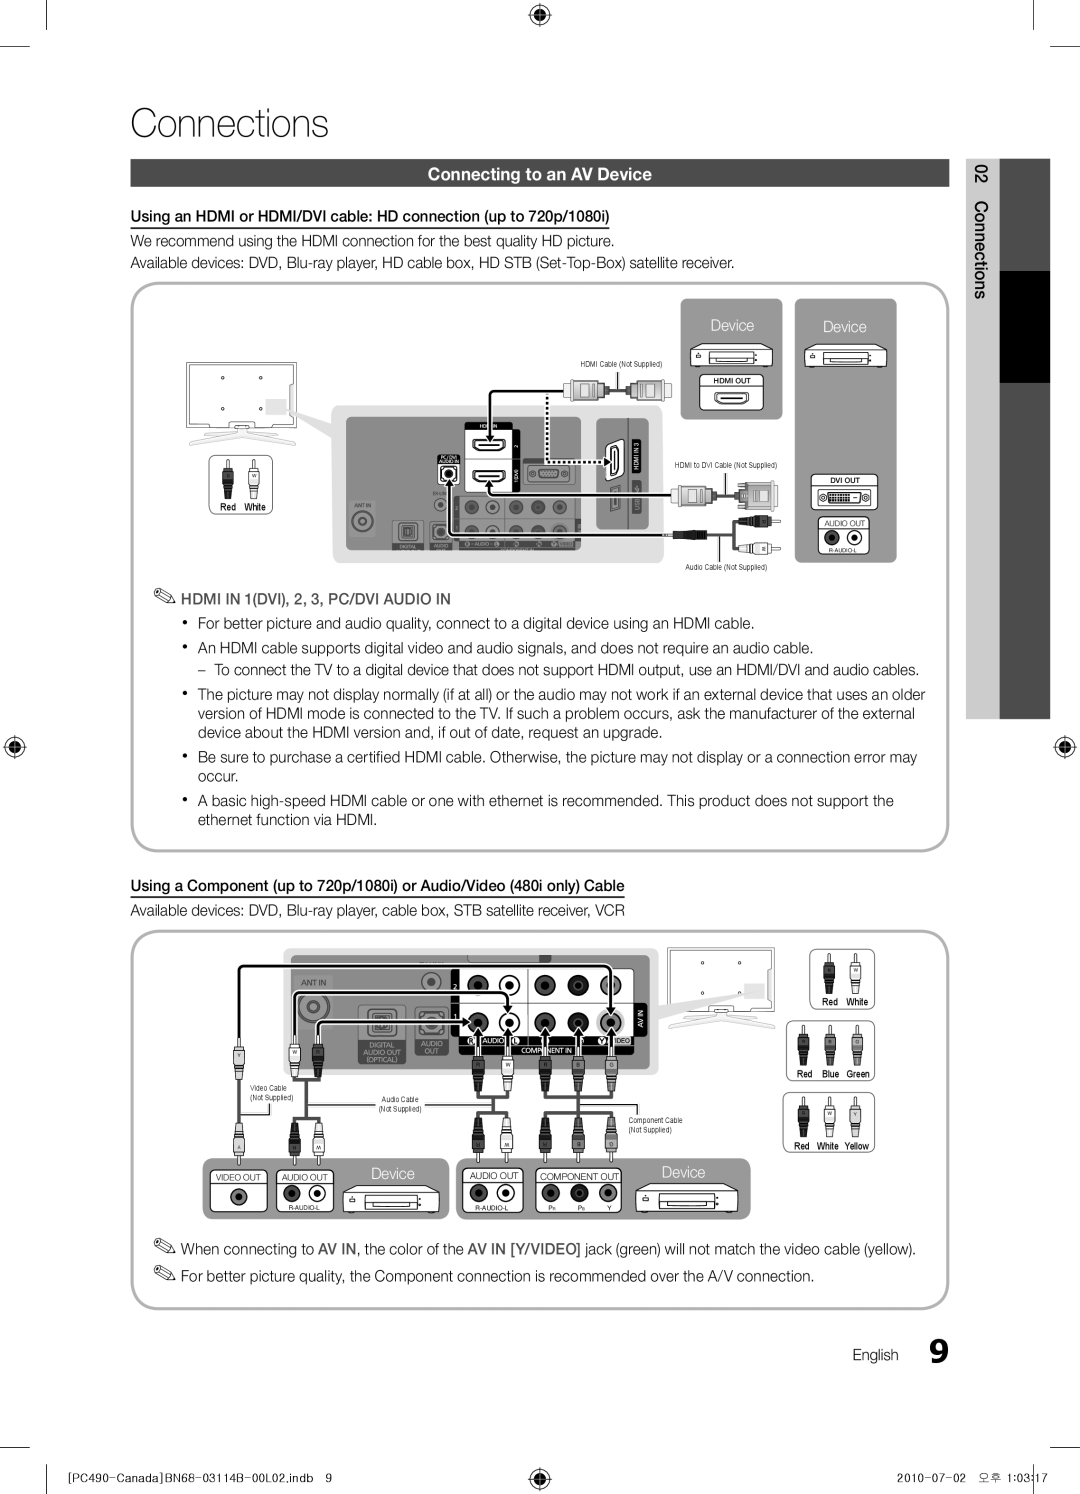 Samsung BN68-03114B-01, PN50C490 user manual Connections, Connecting to an AV Device, HDMI IN 1DVI, 2, 3, PC/DVI AUDIO IN 